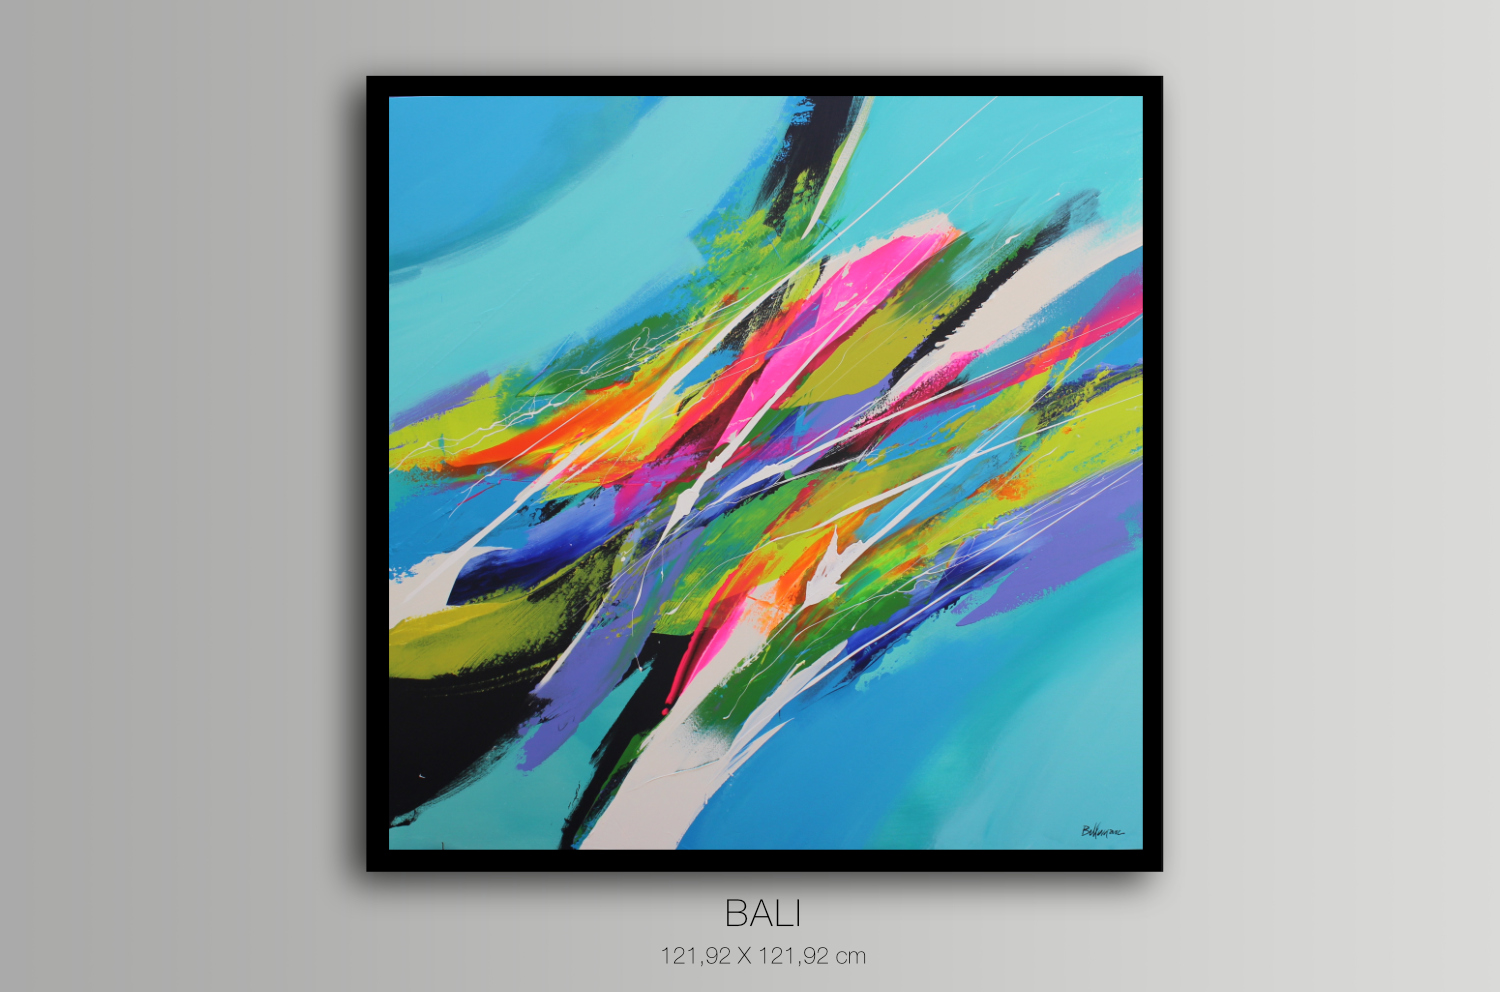 Bali - Featured